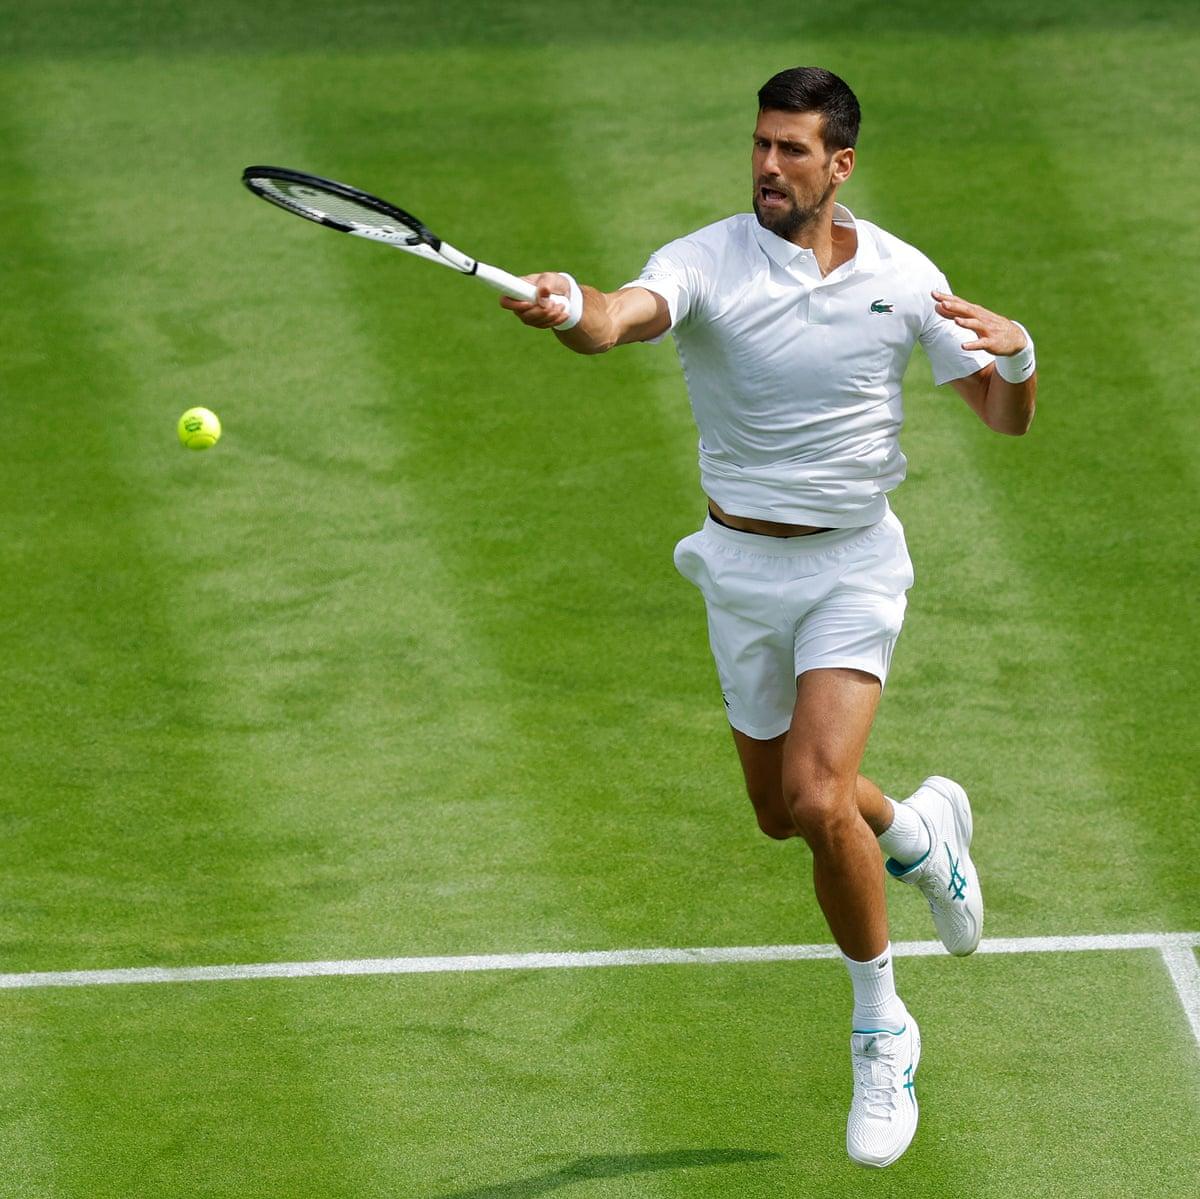 Wimbledon Djokovic Wins After Long Delay Ruud In Action